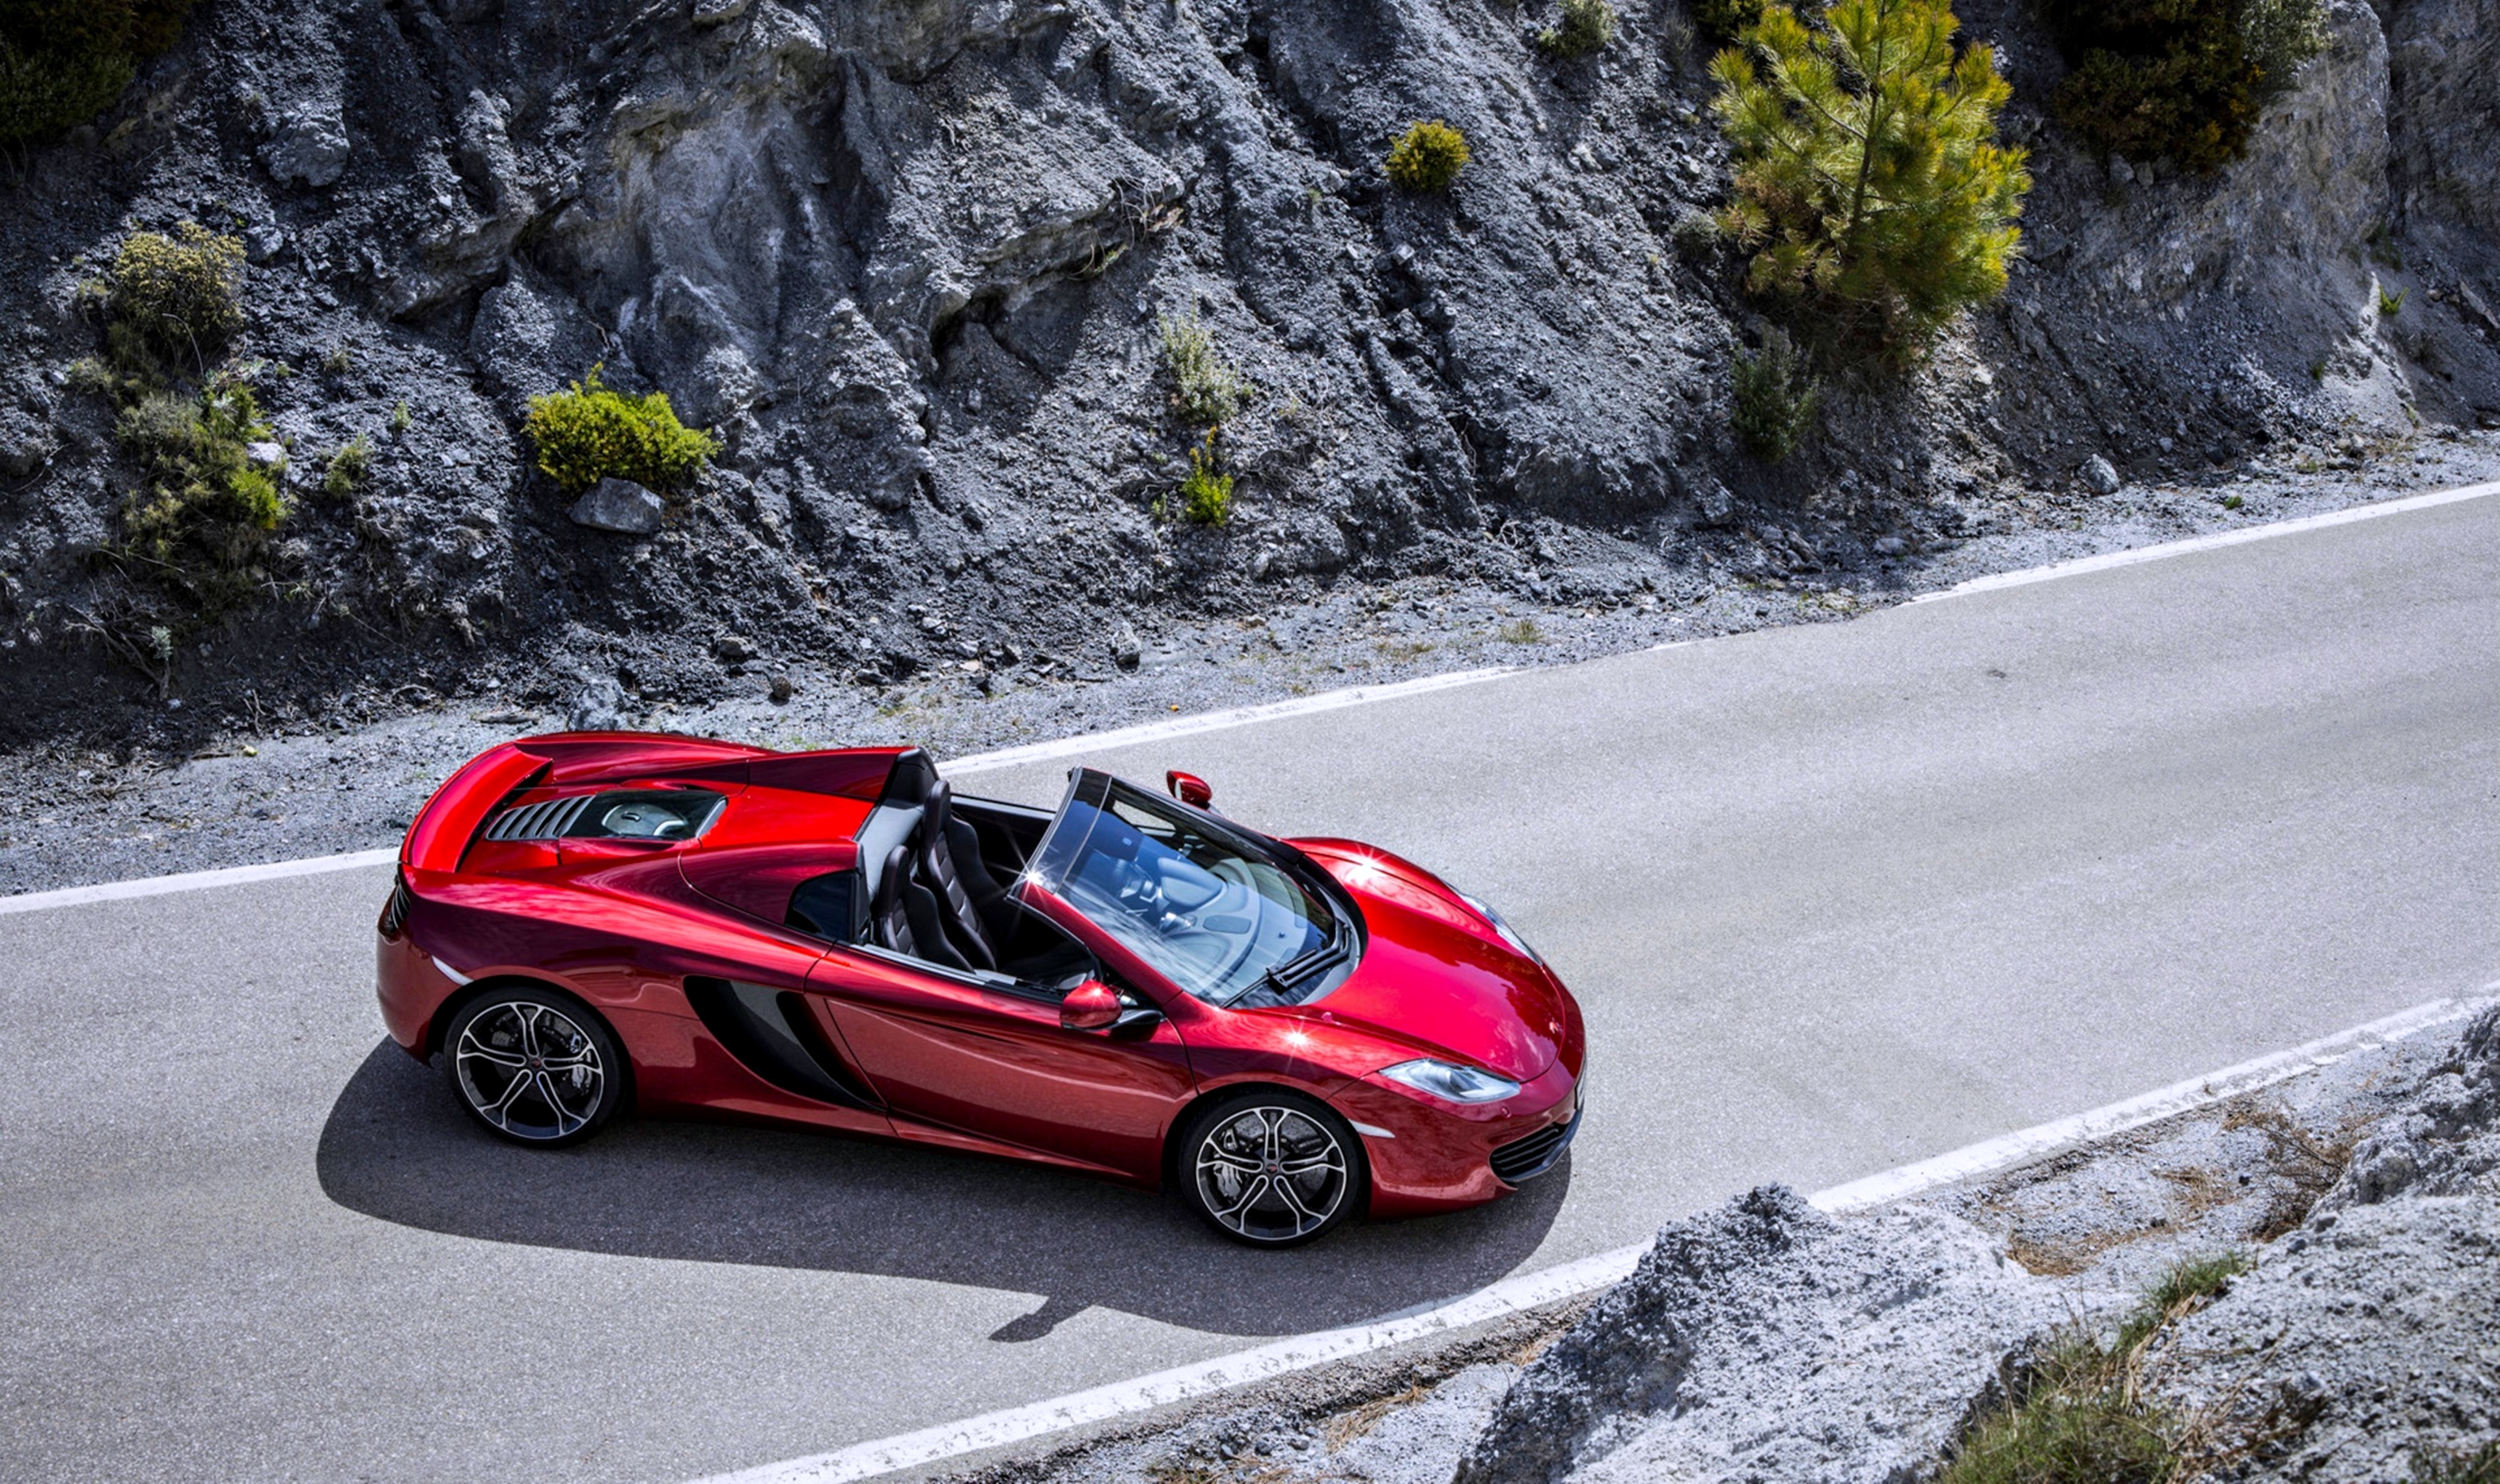 Car Mclaren Mclaren 12c Mclaren Mp4 12c Mclaren Mp4 12c Spider Red Car Supercar Vehicle 3840x2280